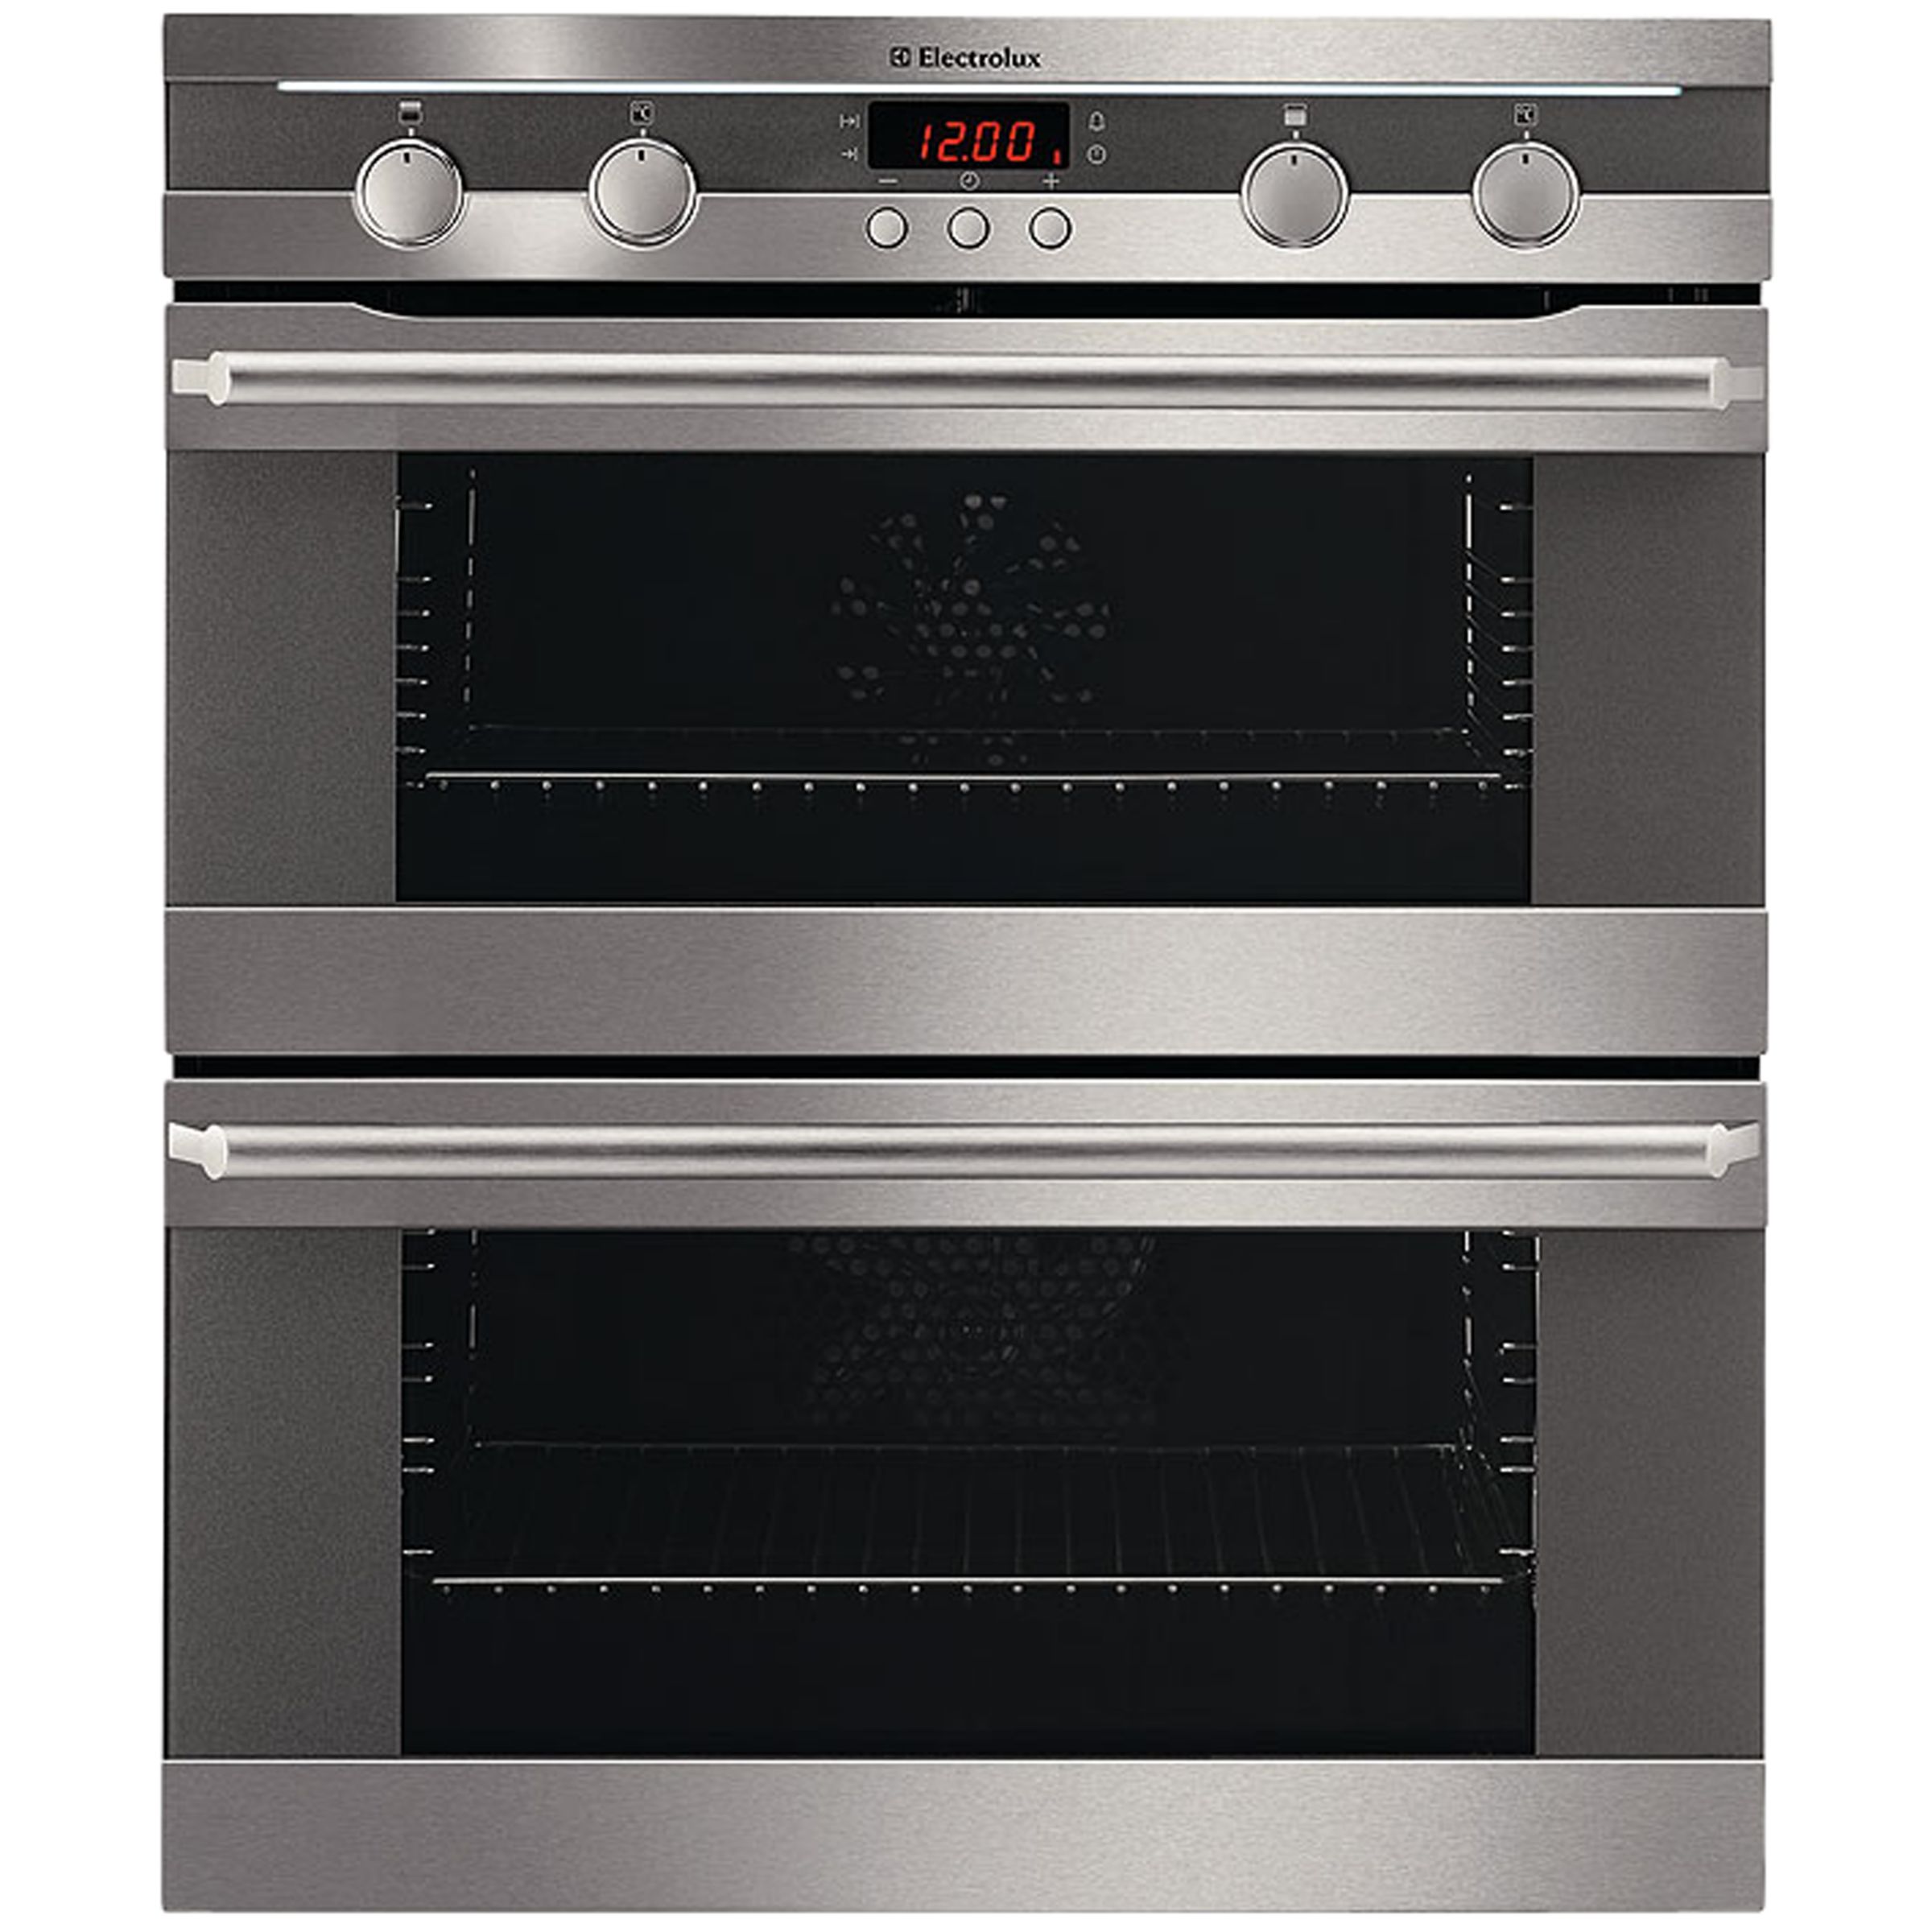 Electrolux EOU63143X Double Electric Oven, Stainless Steel at John Lewis